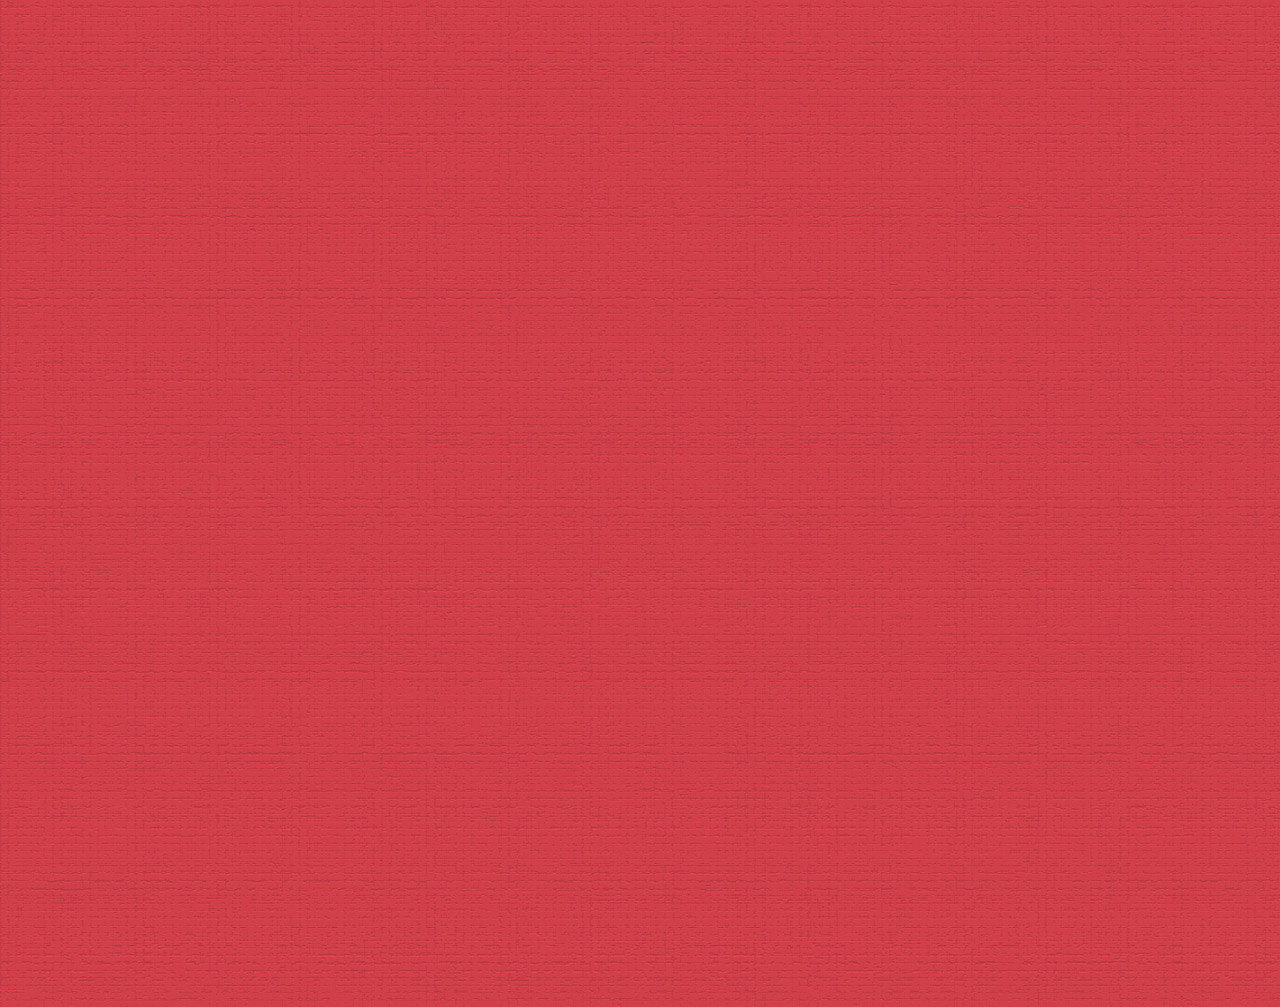 Solid red backgrounds |See To World